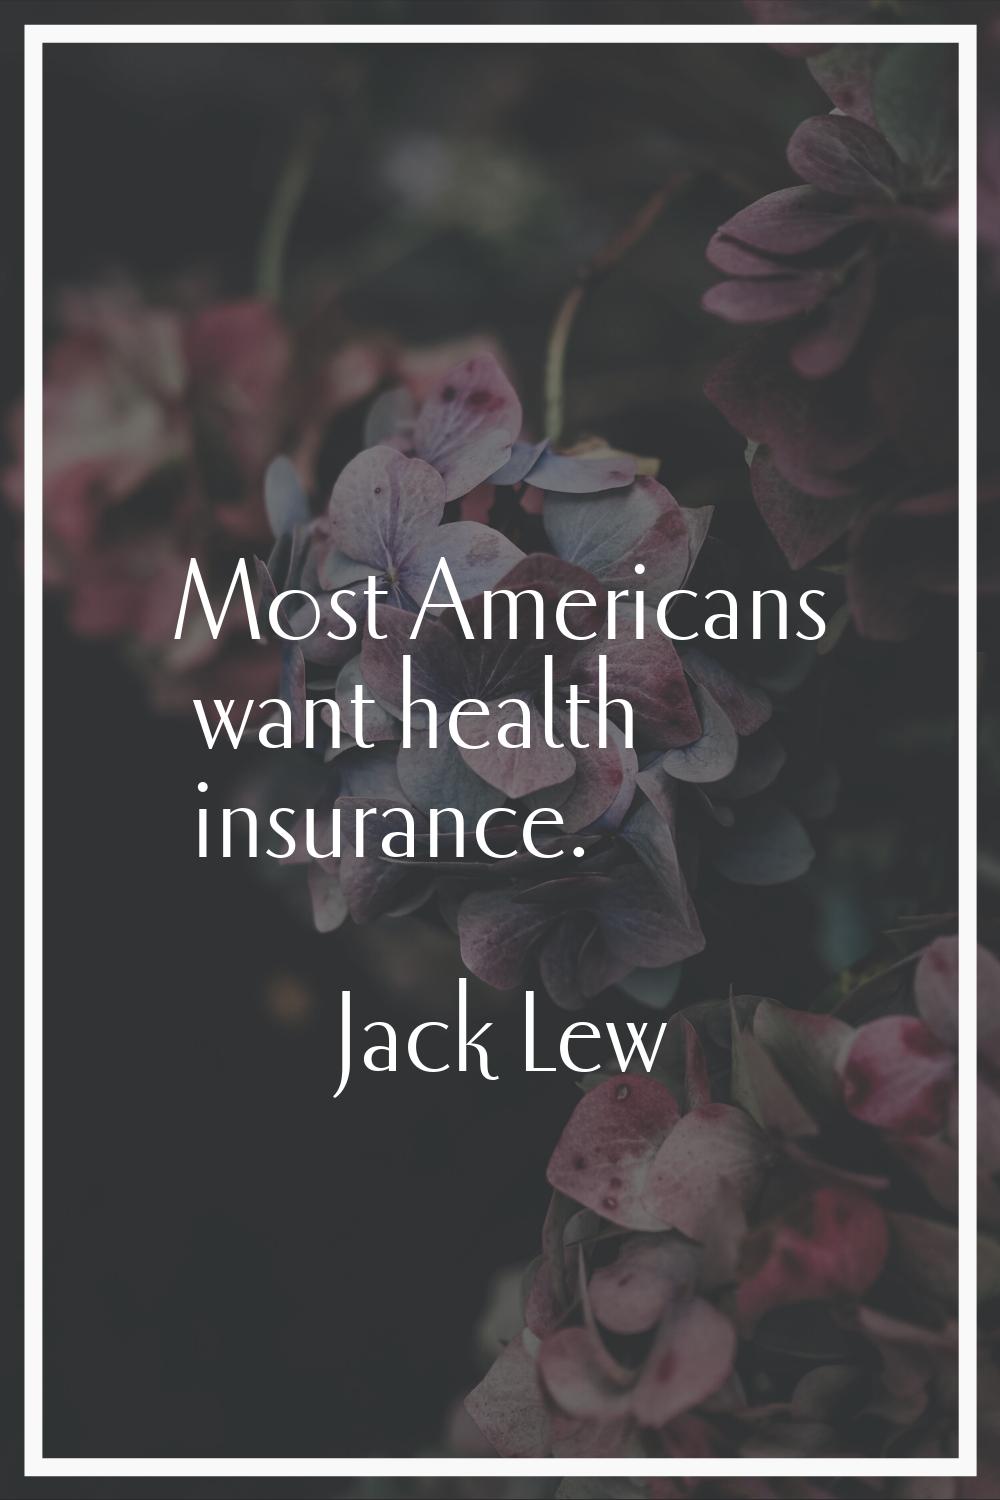 Most Americans want health insurance.